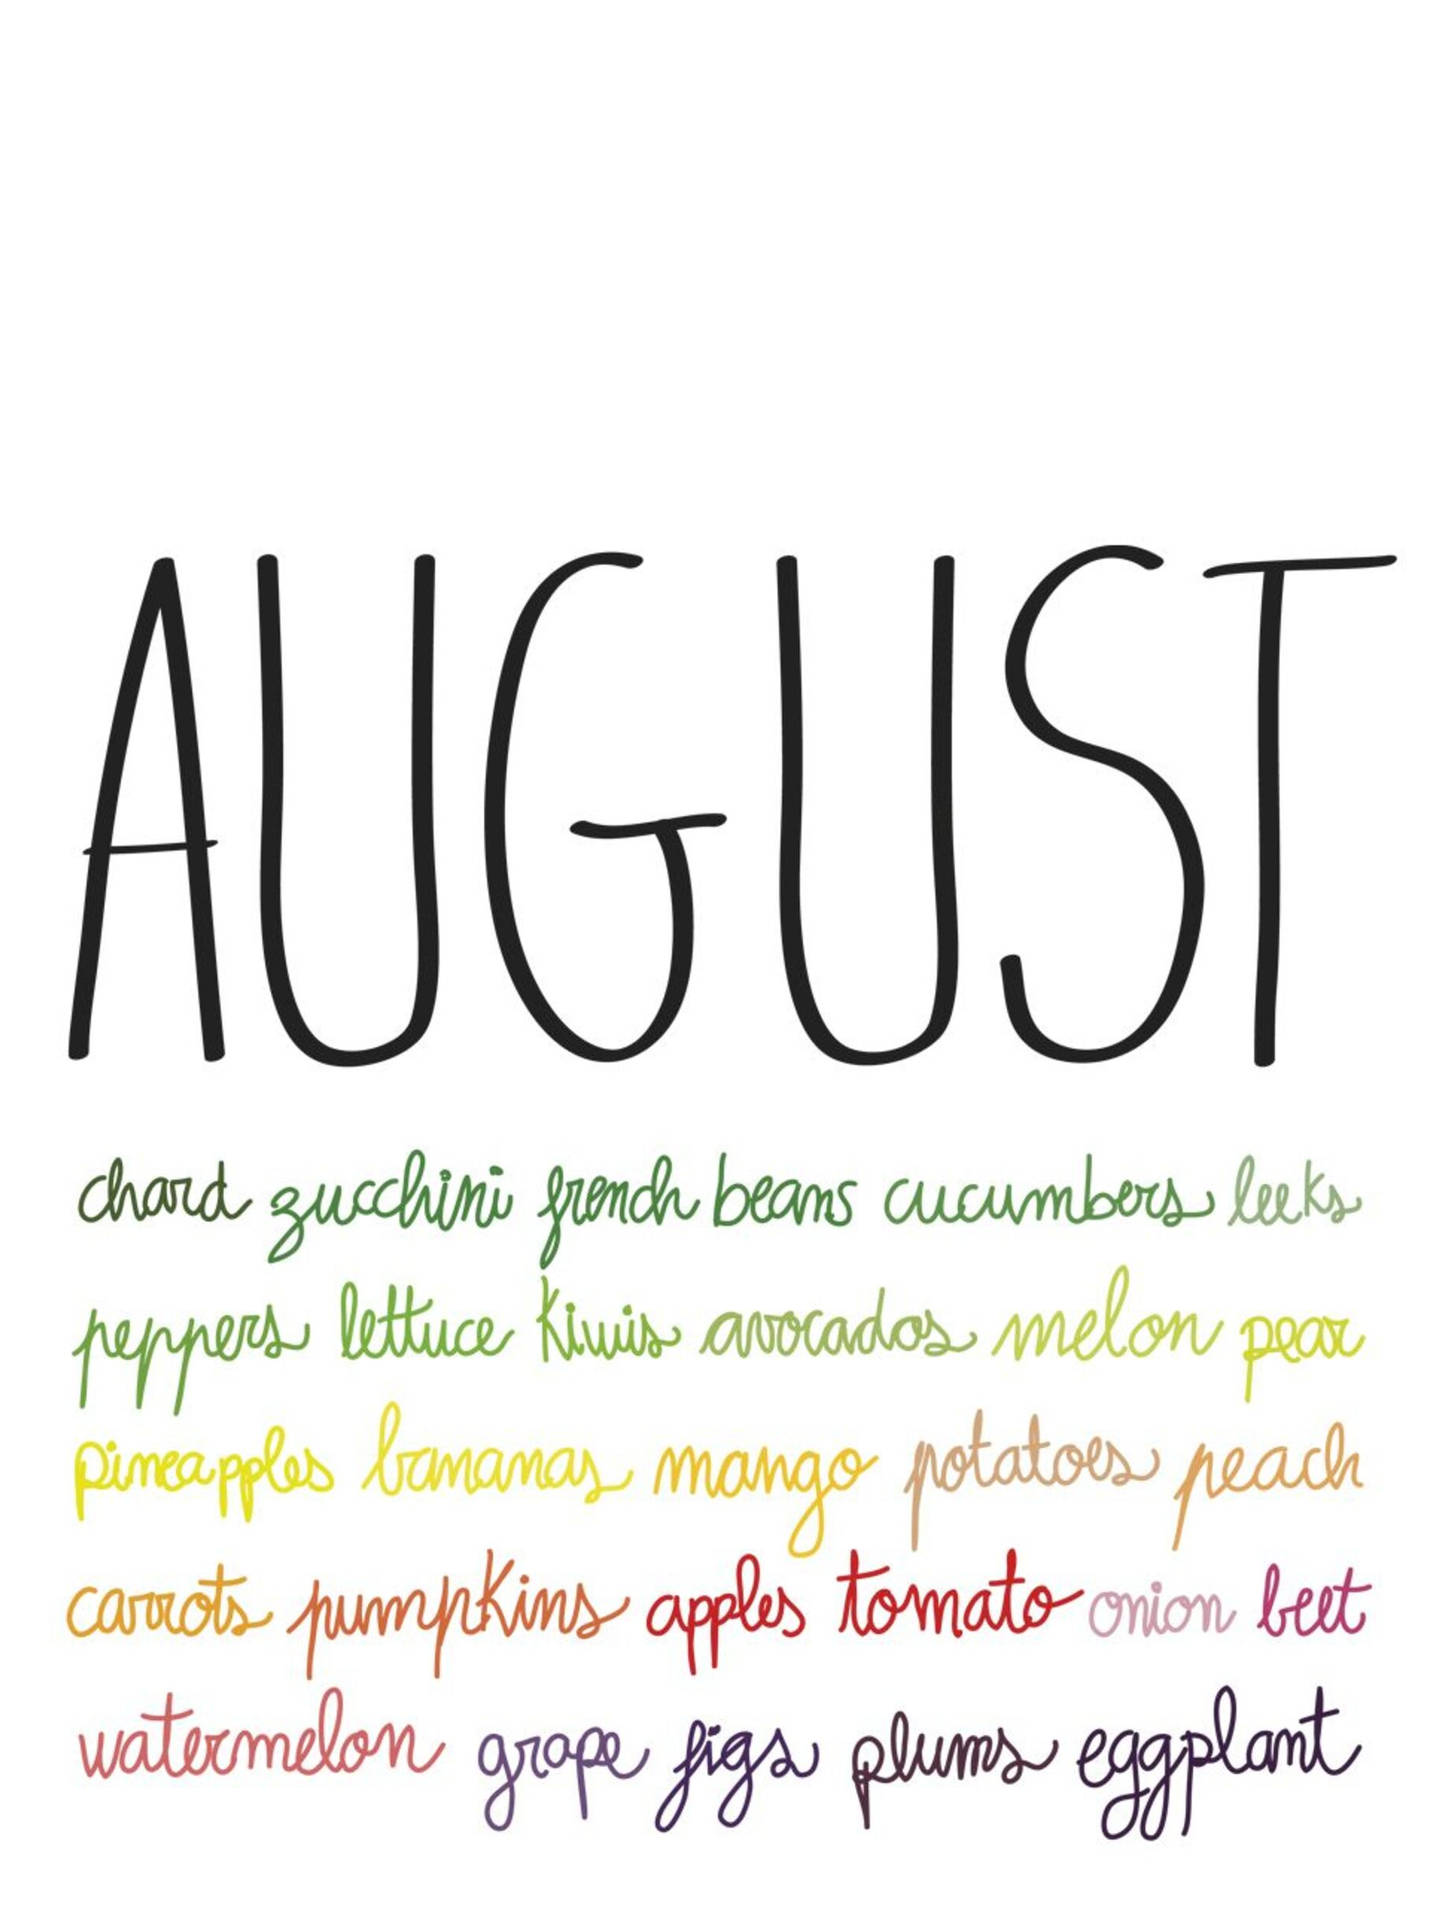 Celebrate The Colors Of August!